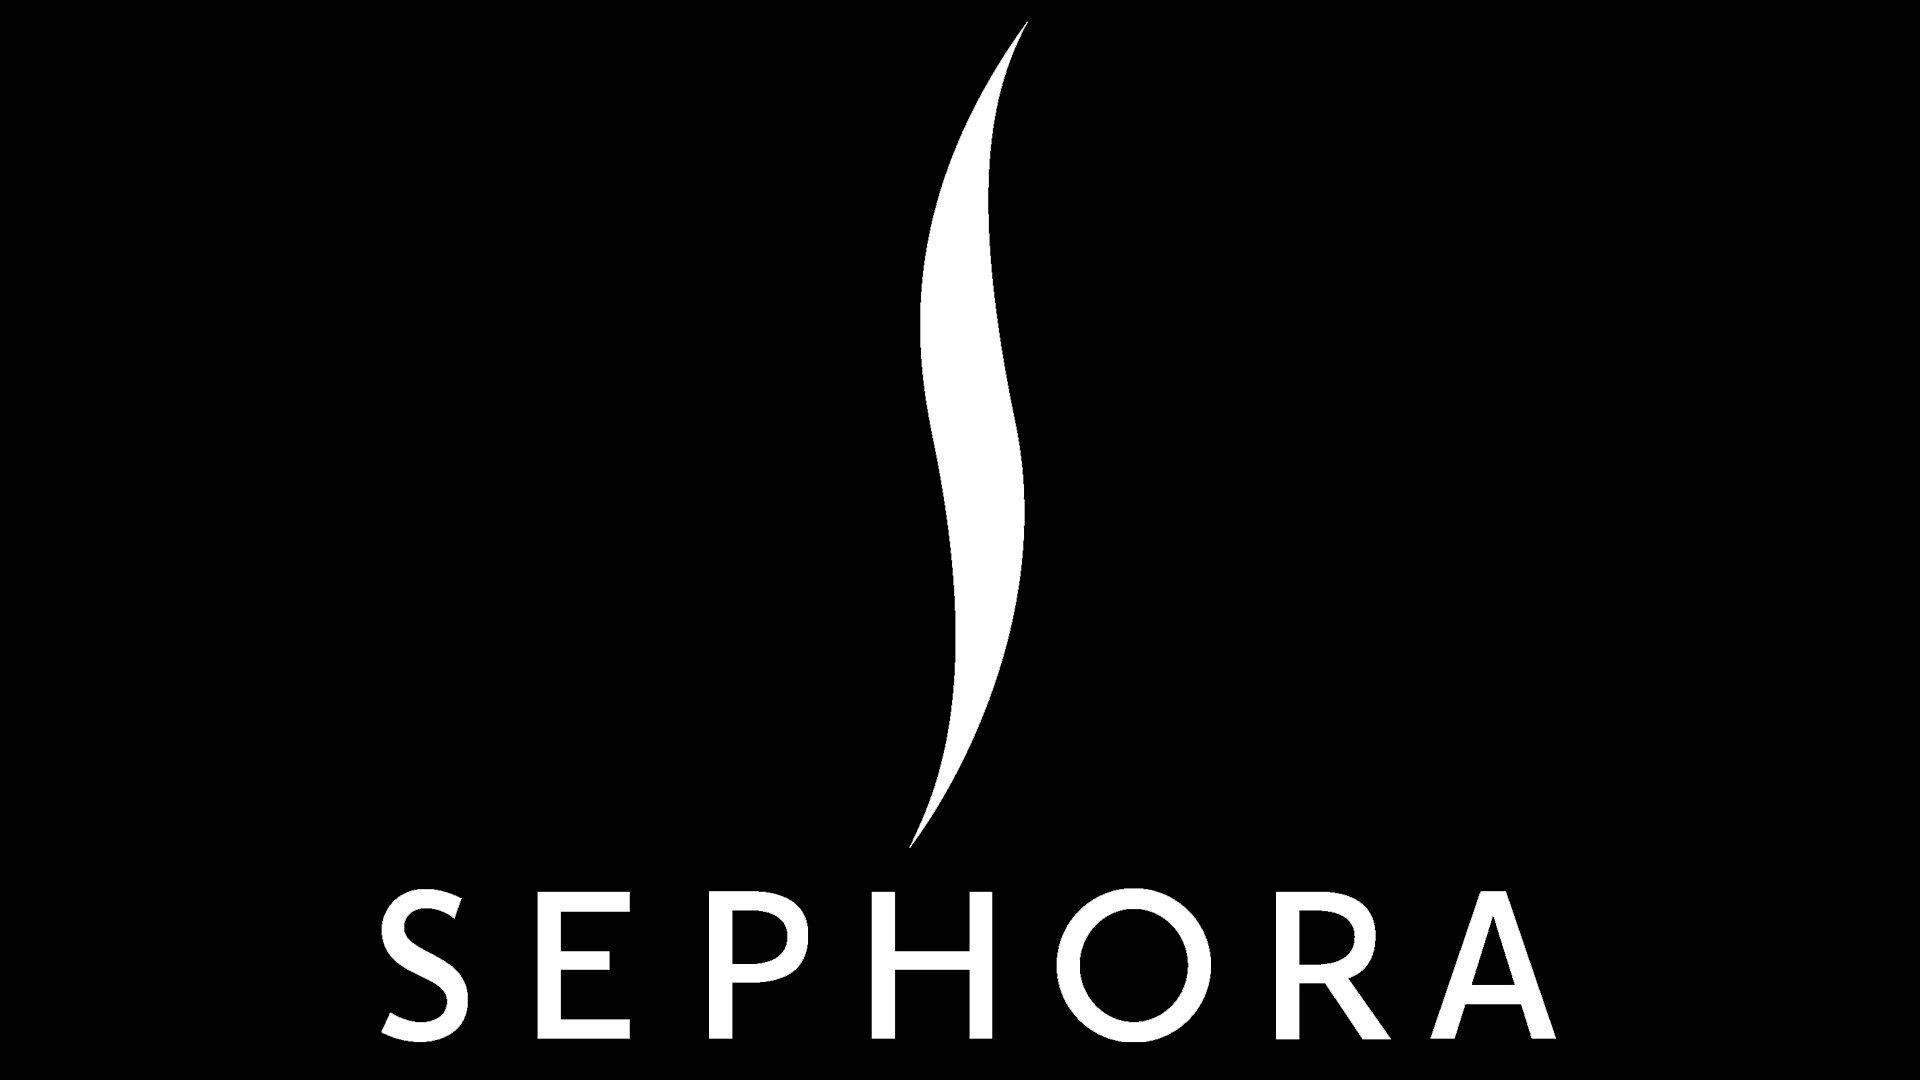 Identifying retail truths and designing equitable experiences with Sephora